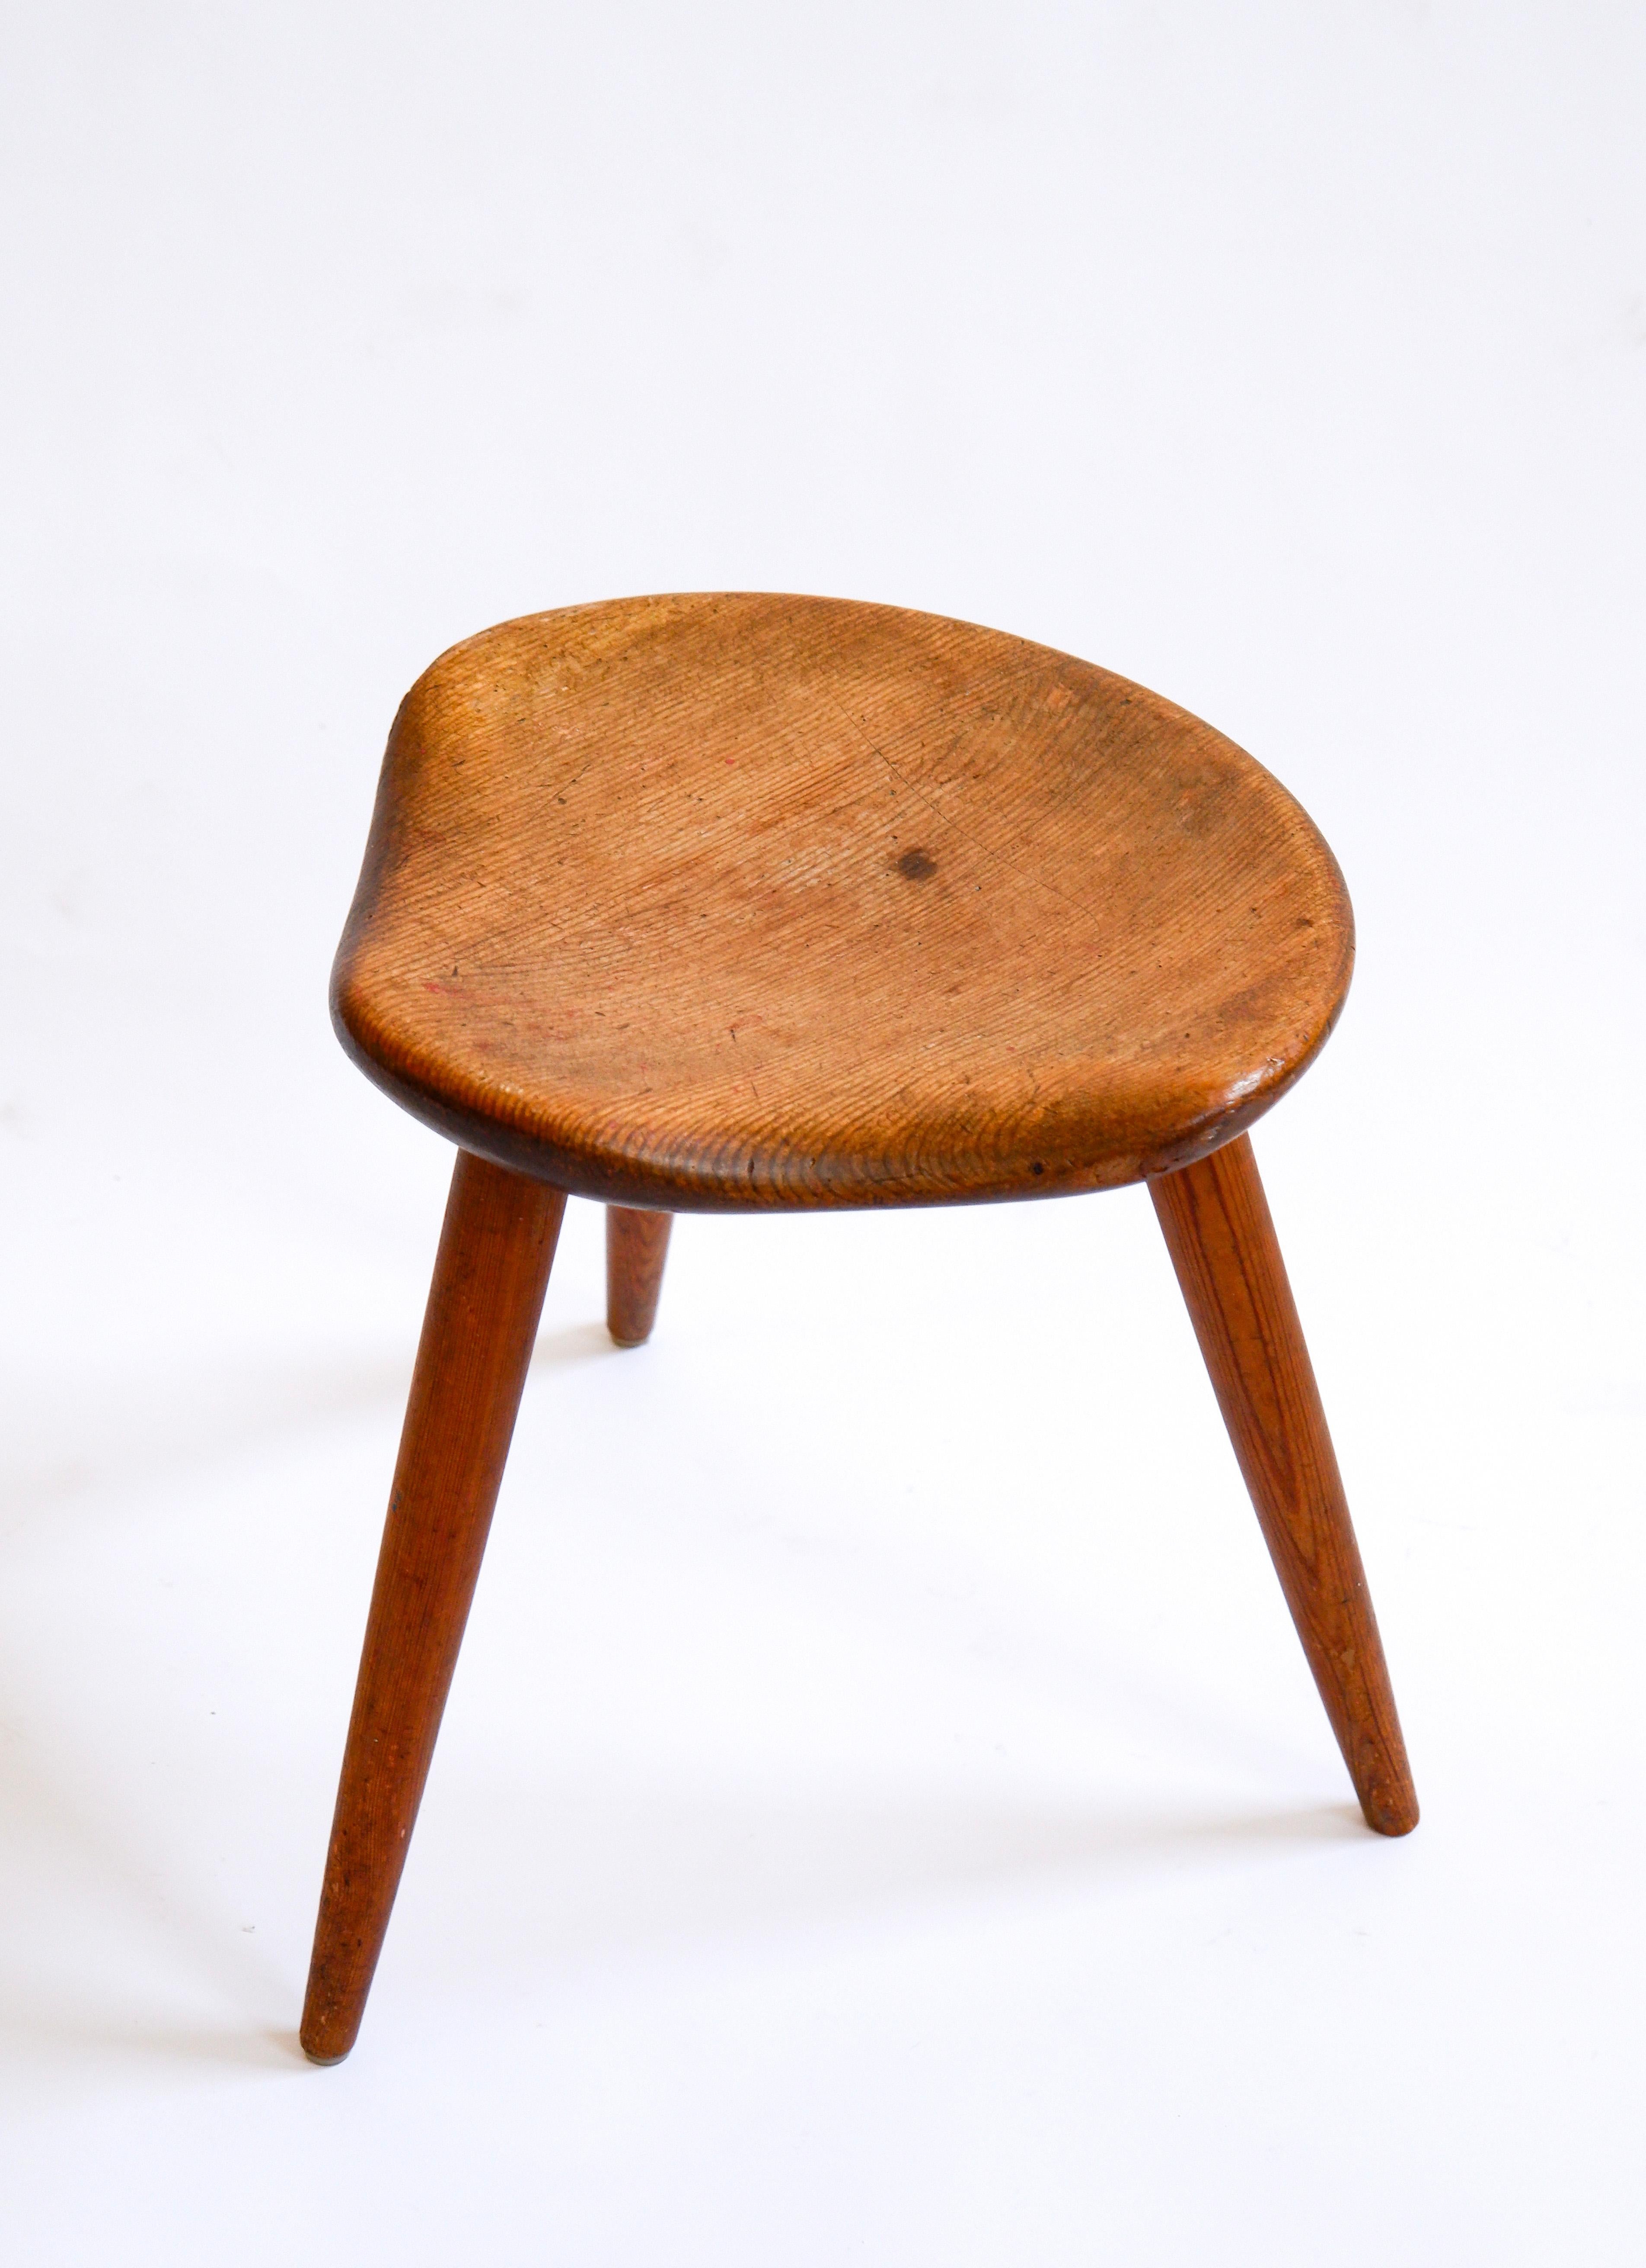 Norweigian pine stool designed and manufactured by Norsk Husflid in the 50's. This tripod stool is made with three slim feets with a horse saddle shaped seat on top. A really special design for this scandinavian design piece. The stool is in good